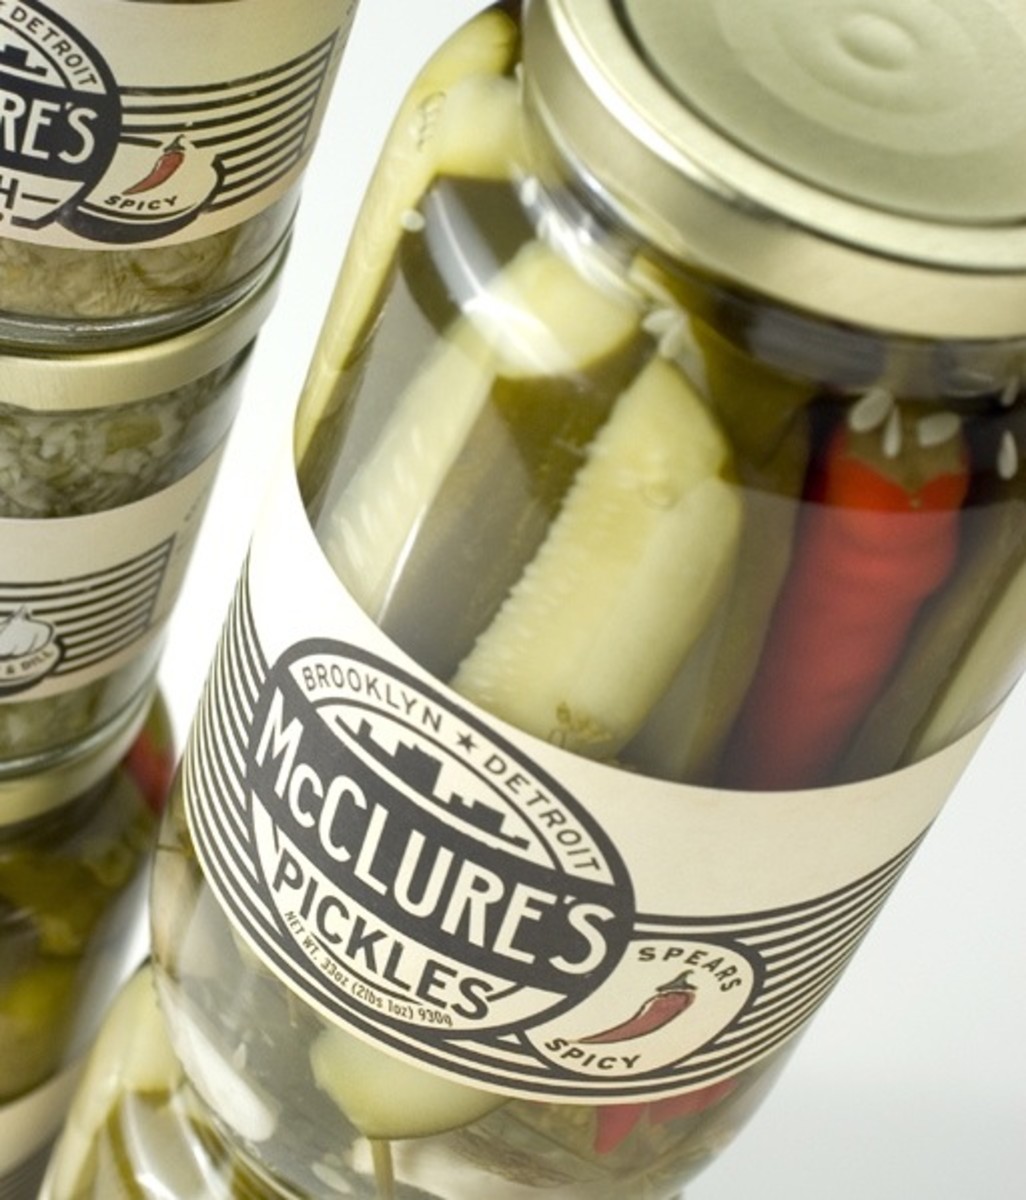 McClure's are the best spicy pickles overall.